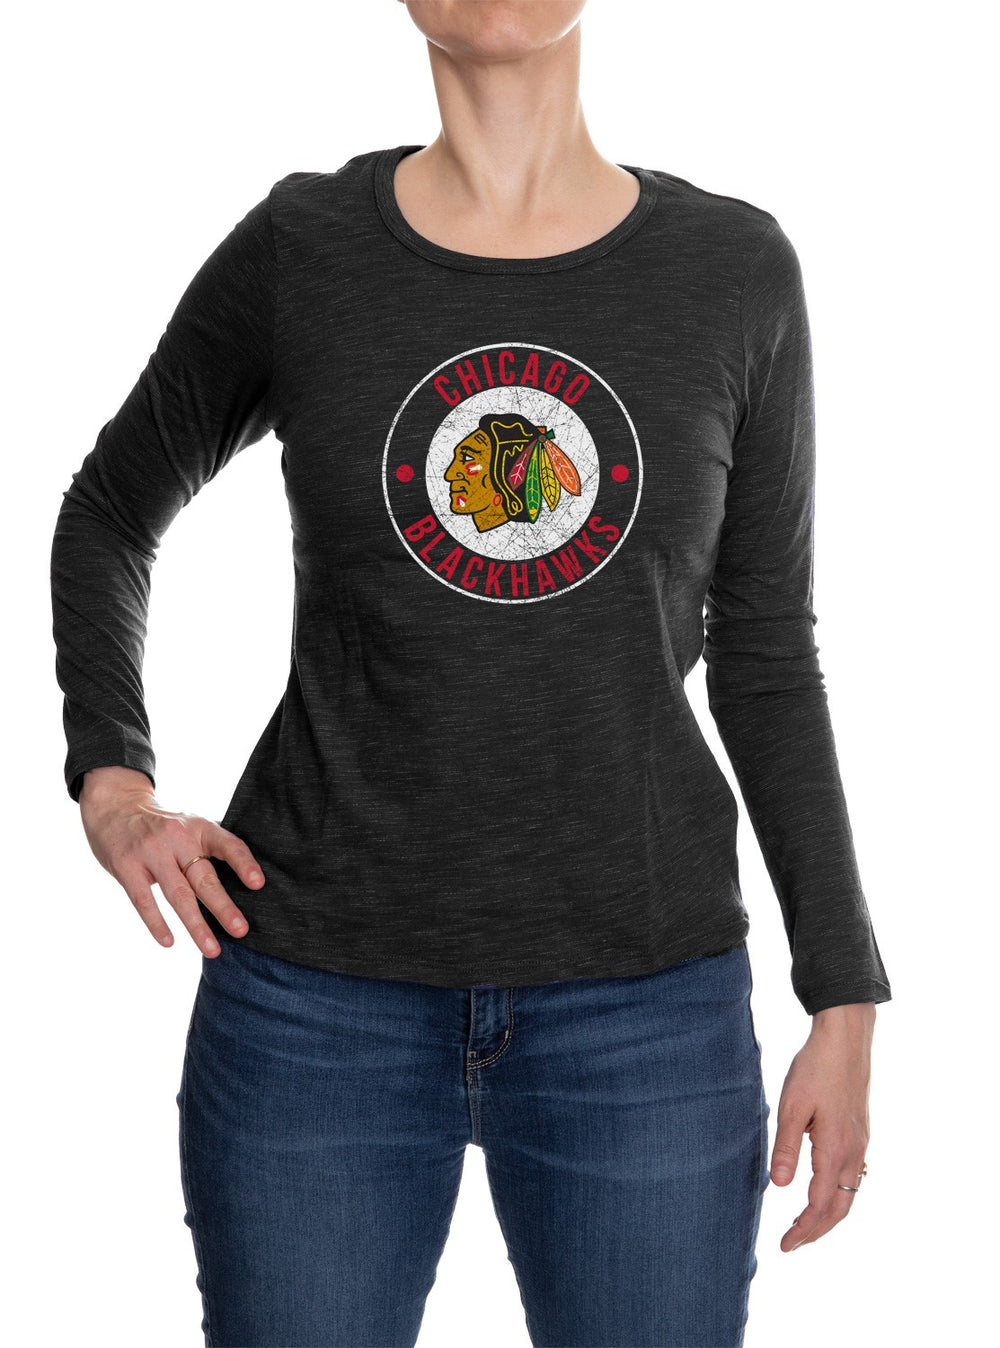 Chicago Blackhawks Distressed Logo Long Sleeve Shirt for Women in Black Front View